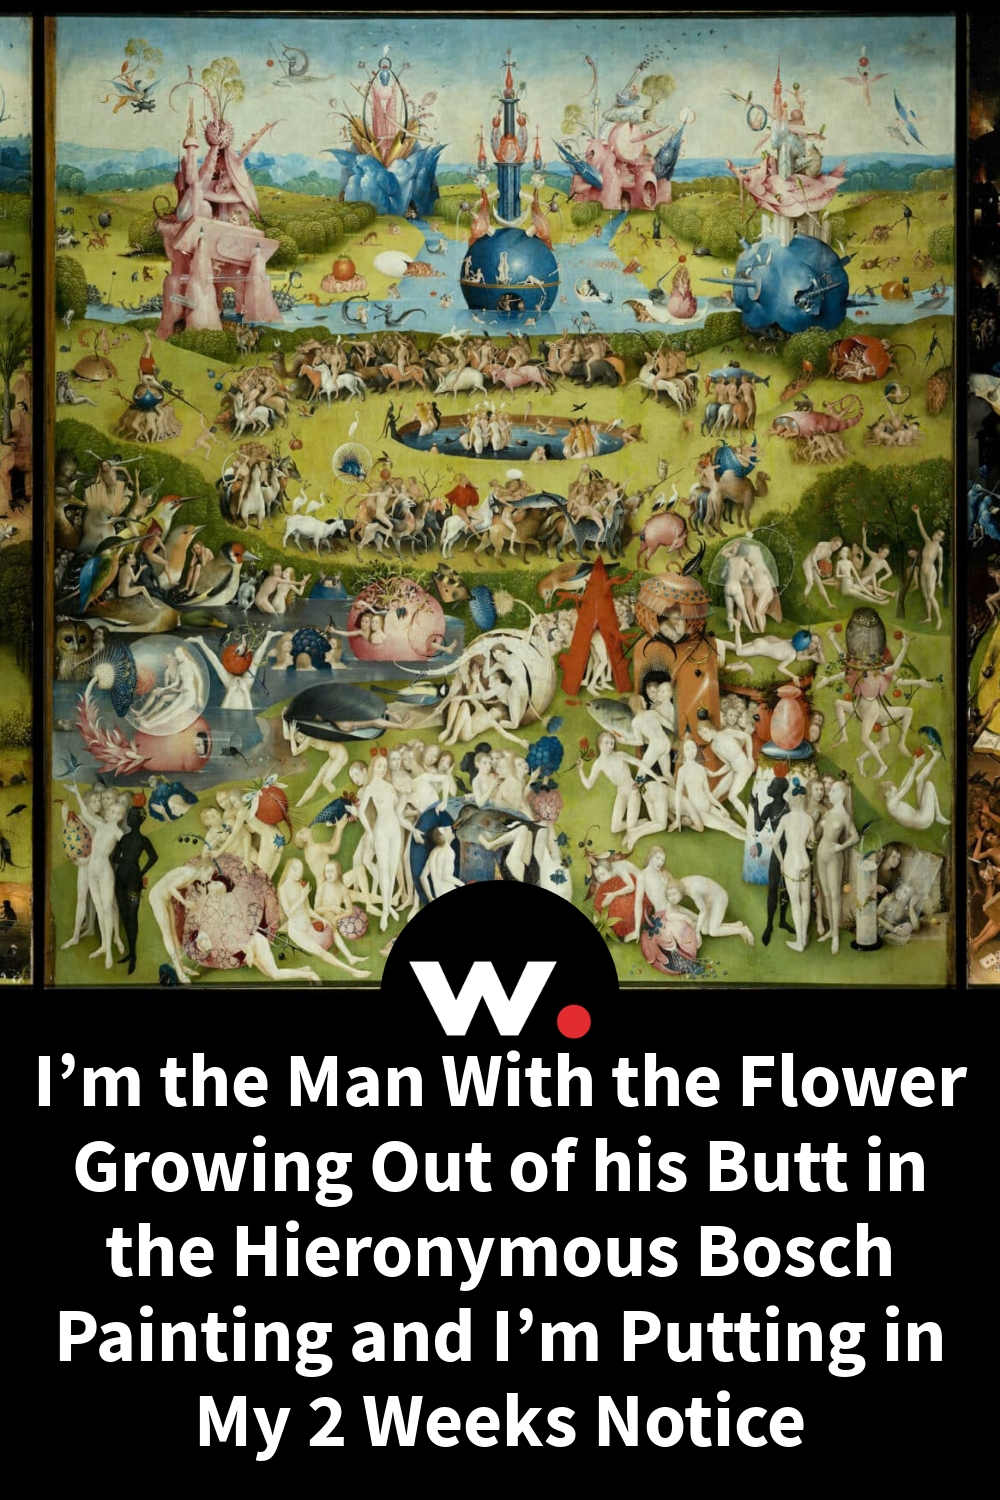 I’m the Man With the Flower Growing Out of his Butt in the Hieronymous Bosch Painting and I’m Putting in My 2 Weeks Notice